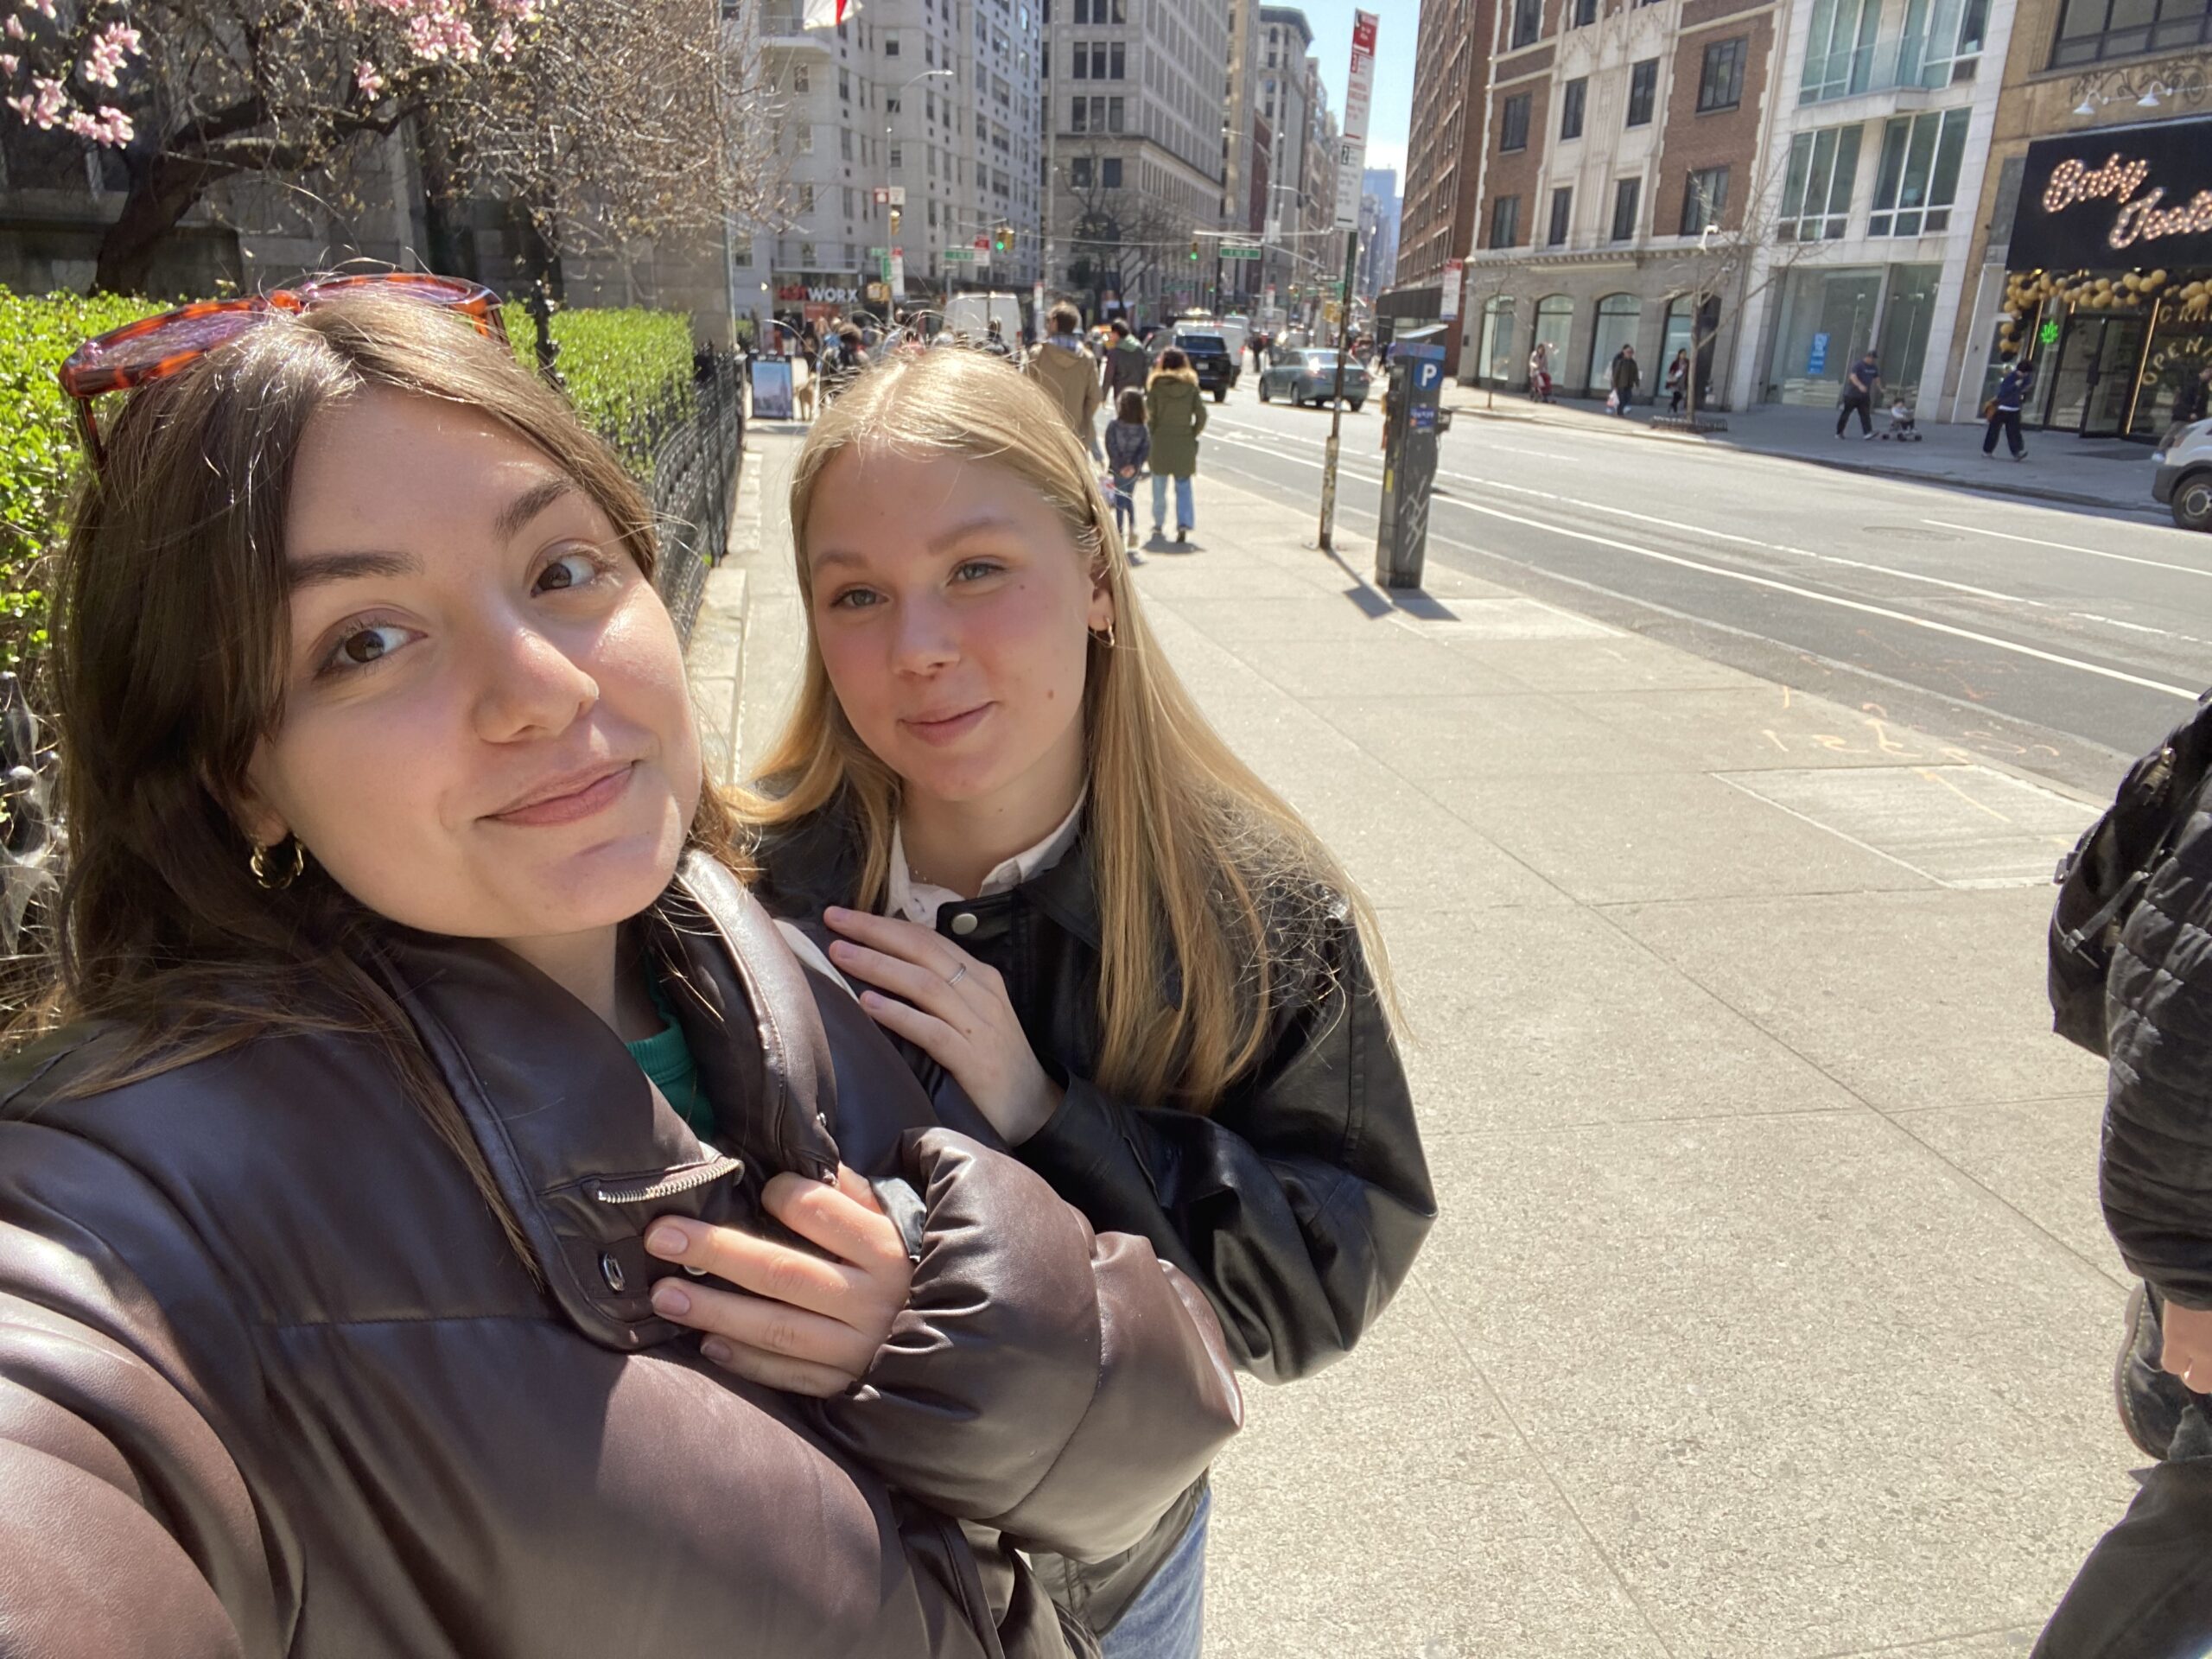 Amina poses for a selfie with a friend by a park in NYC